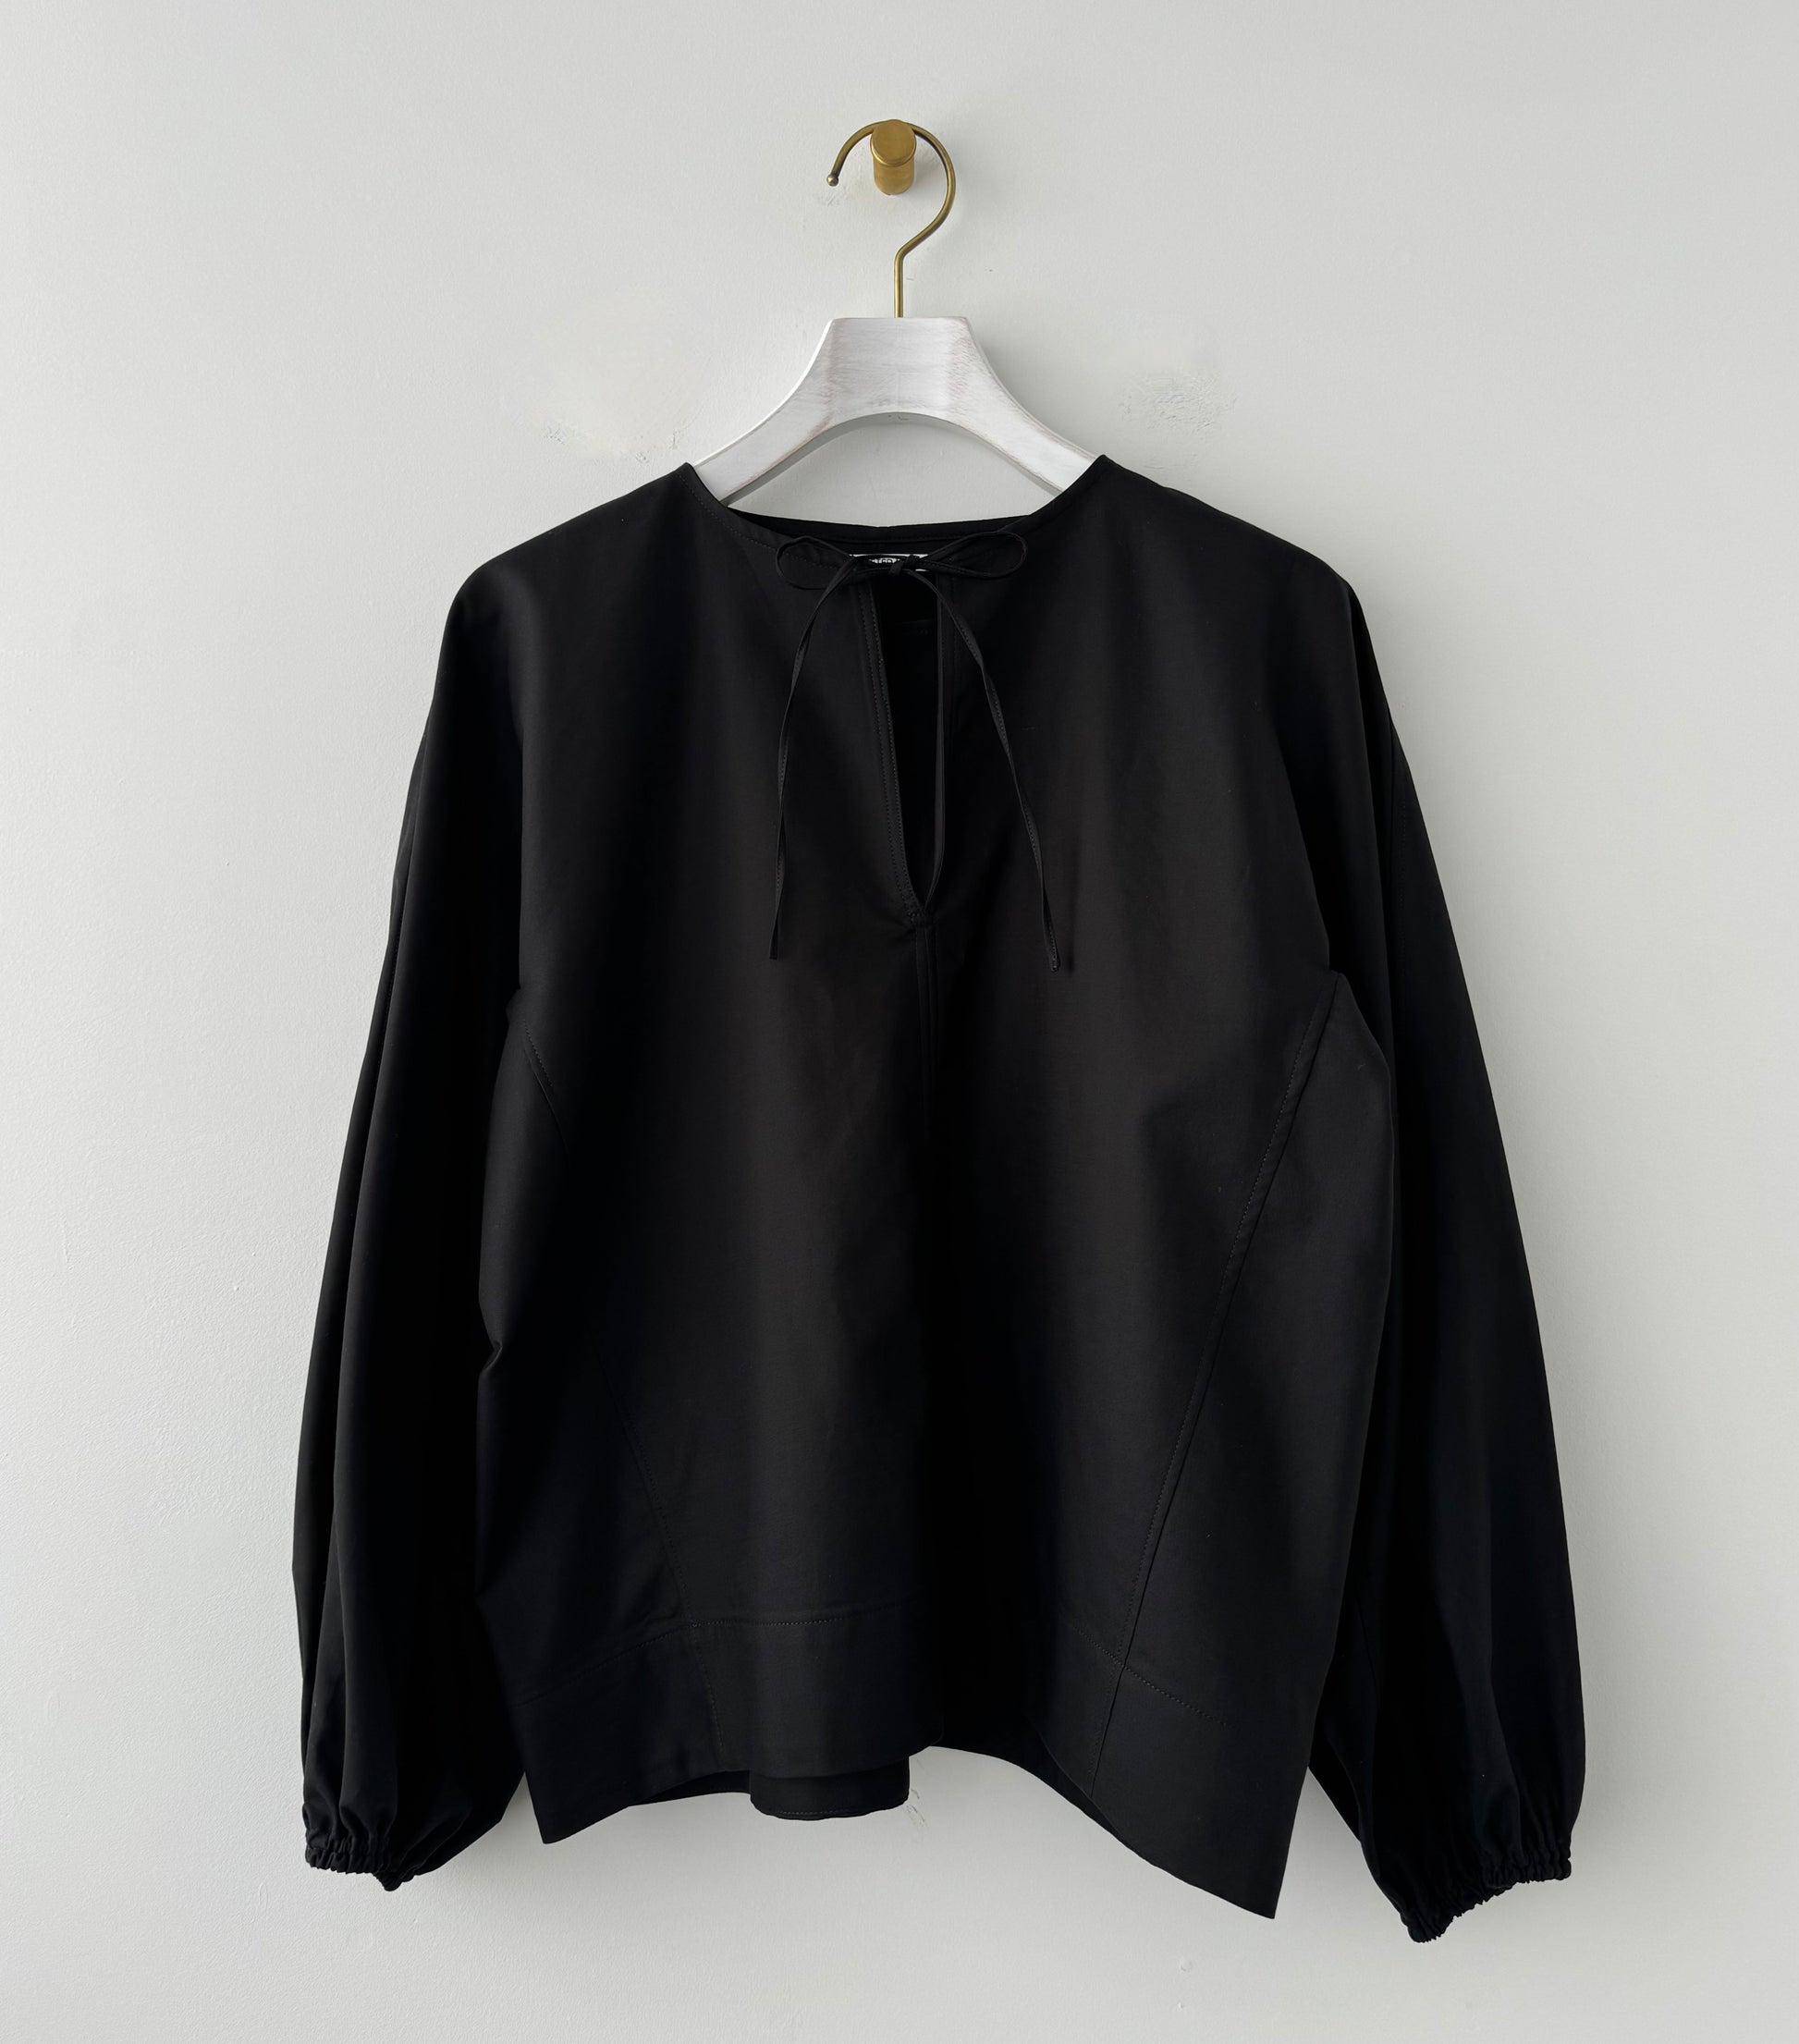 Volume sleeve pull-over (BLACK)　TENNE HANDCRAFTED MODERN ブラウス　通販　取扱店